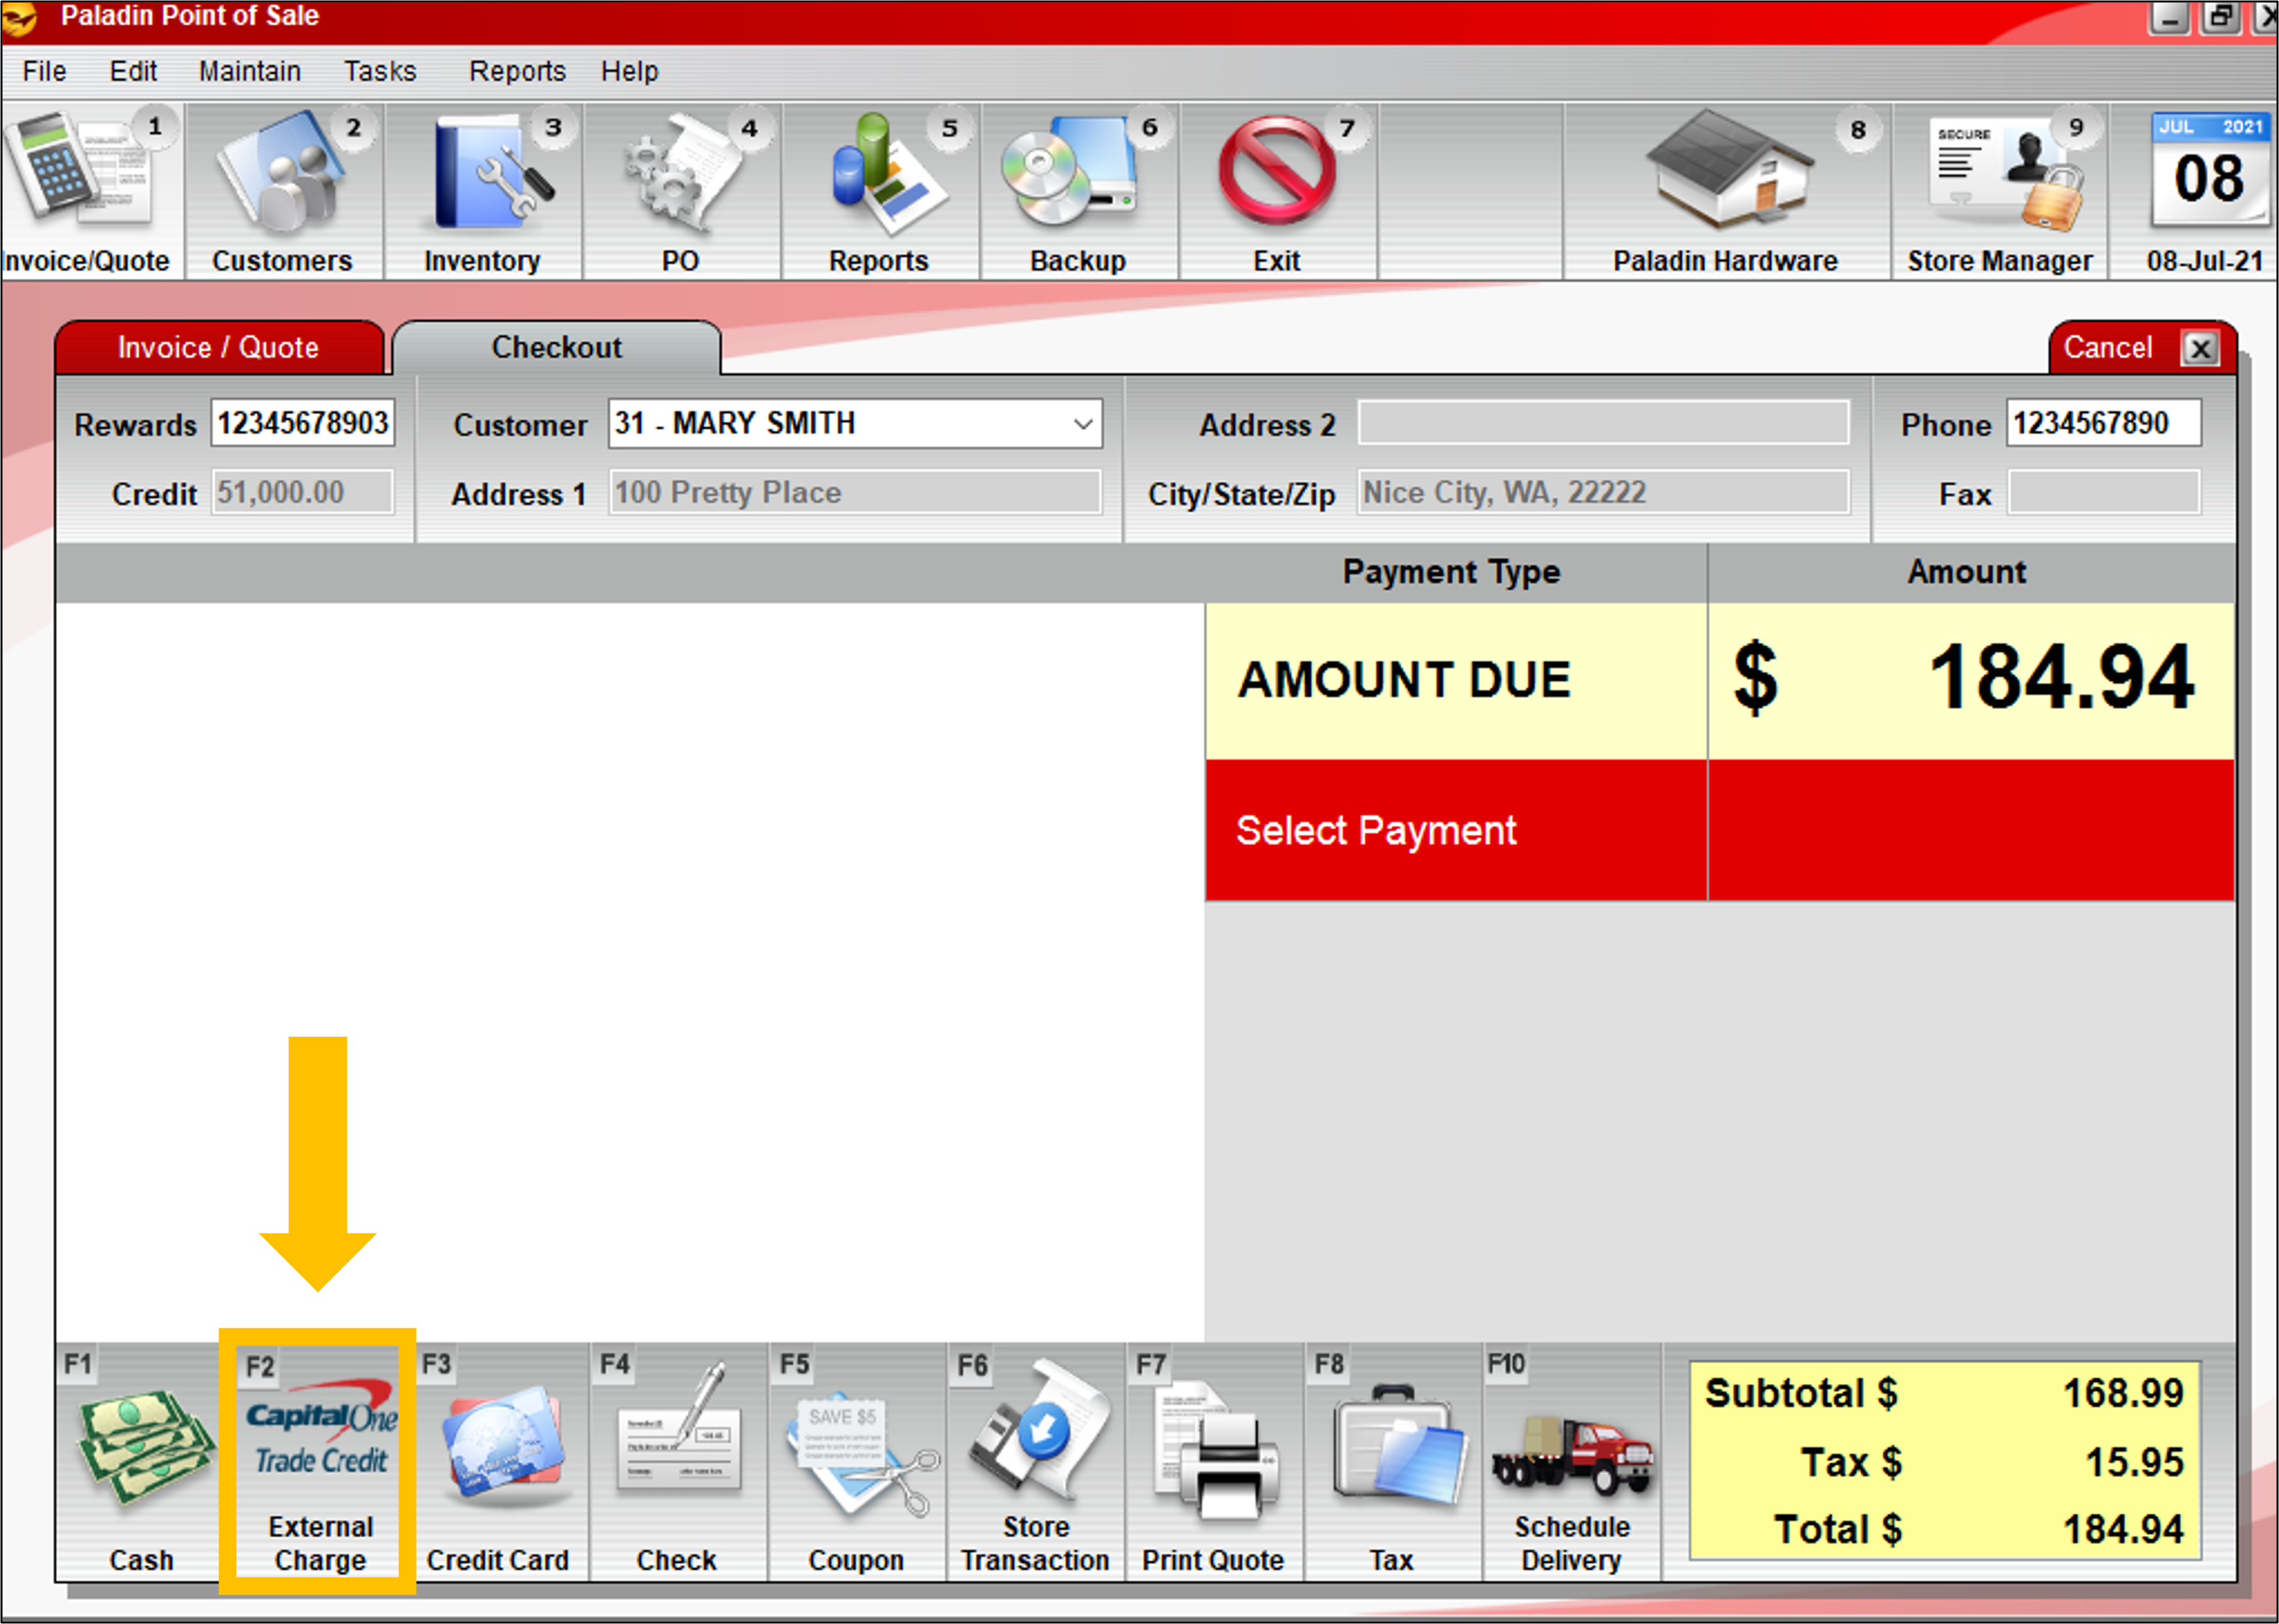 F2 Capital One Trade Credit payment button